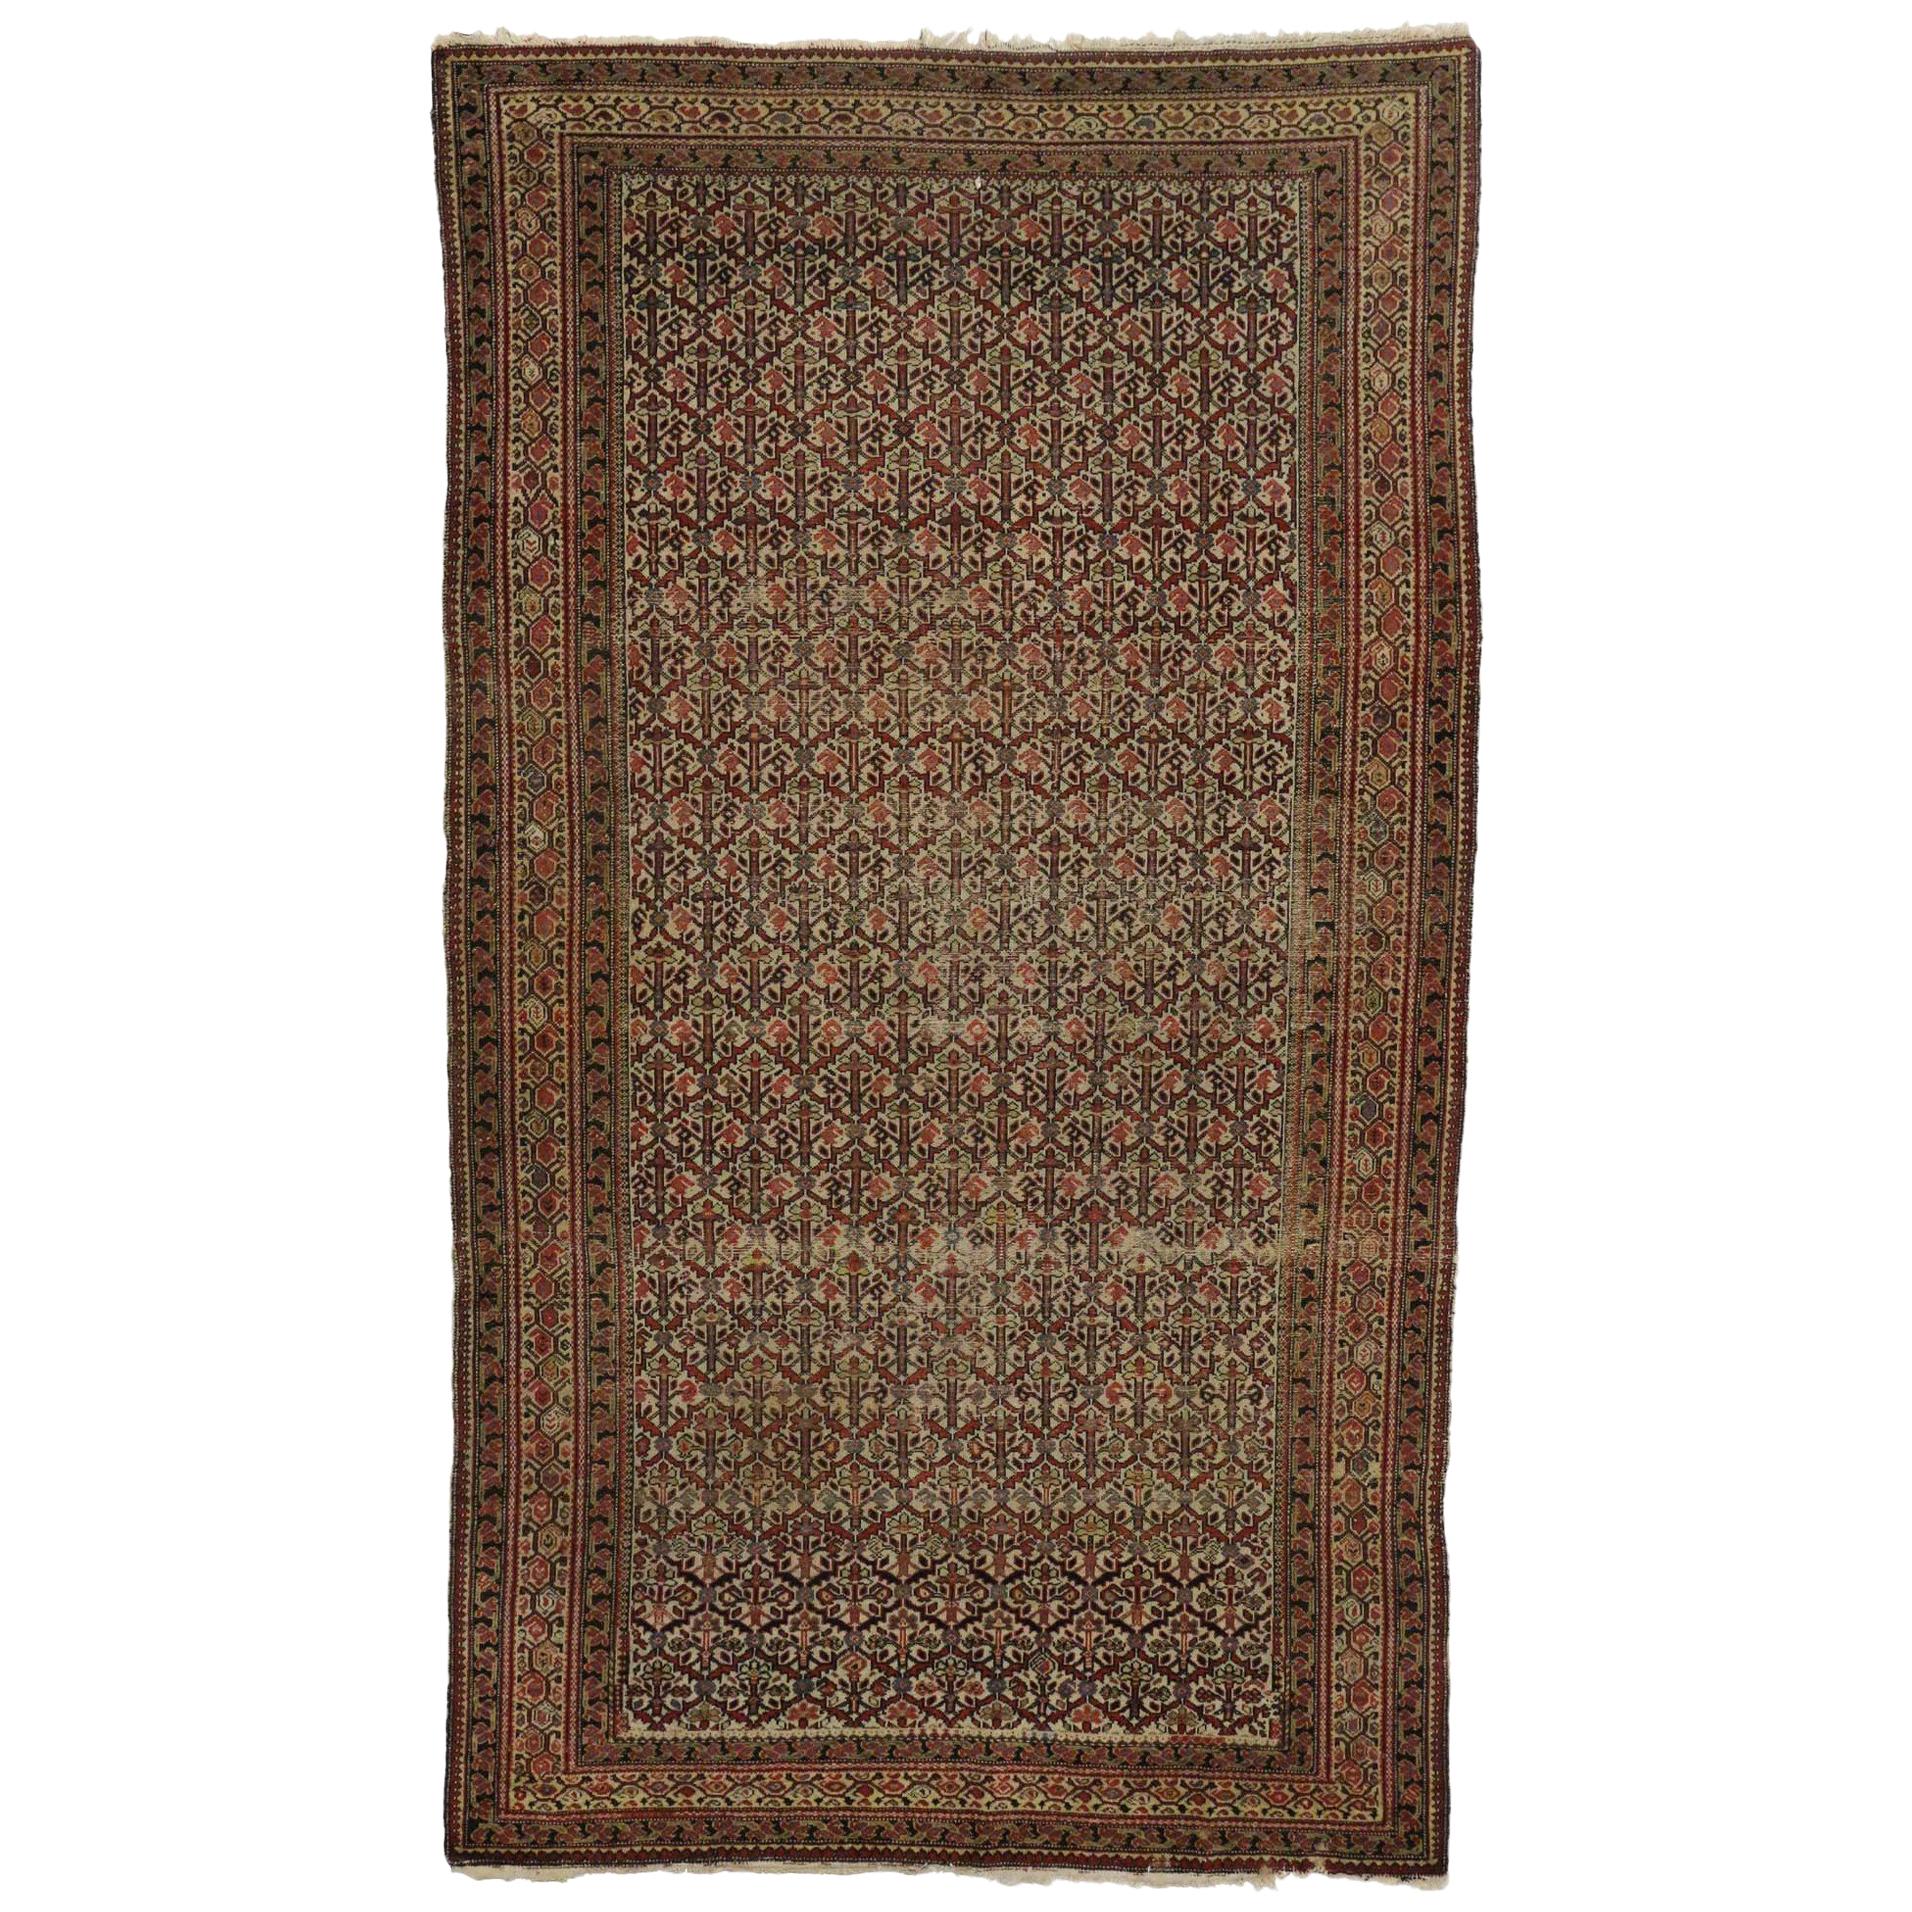 Distressed Antique Malayer Persian Area Rug with Industrial Rustic Style For Sale